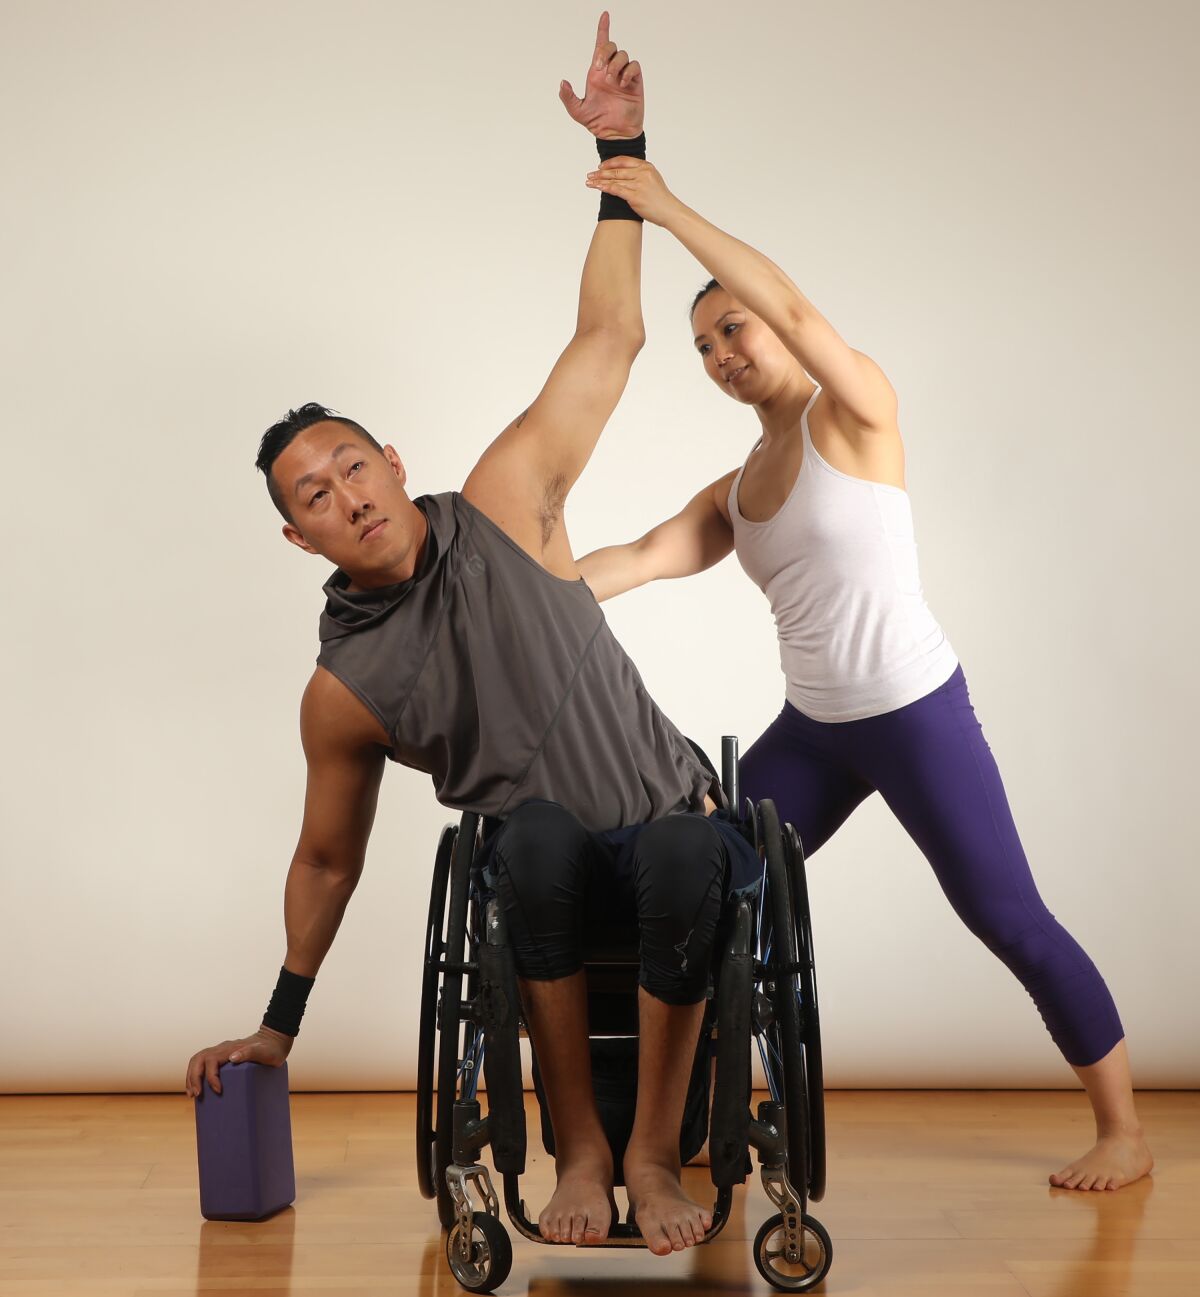 Dr. Ingrid Yang and James Sa demonstrate the Seated Extended Triangle pose, used in adaptive wheelchair yoga.